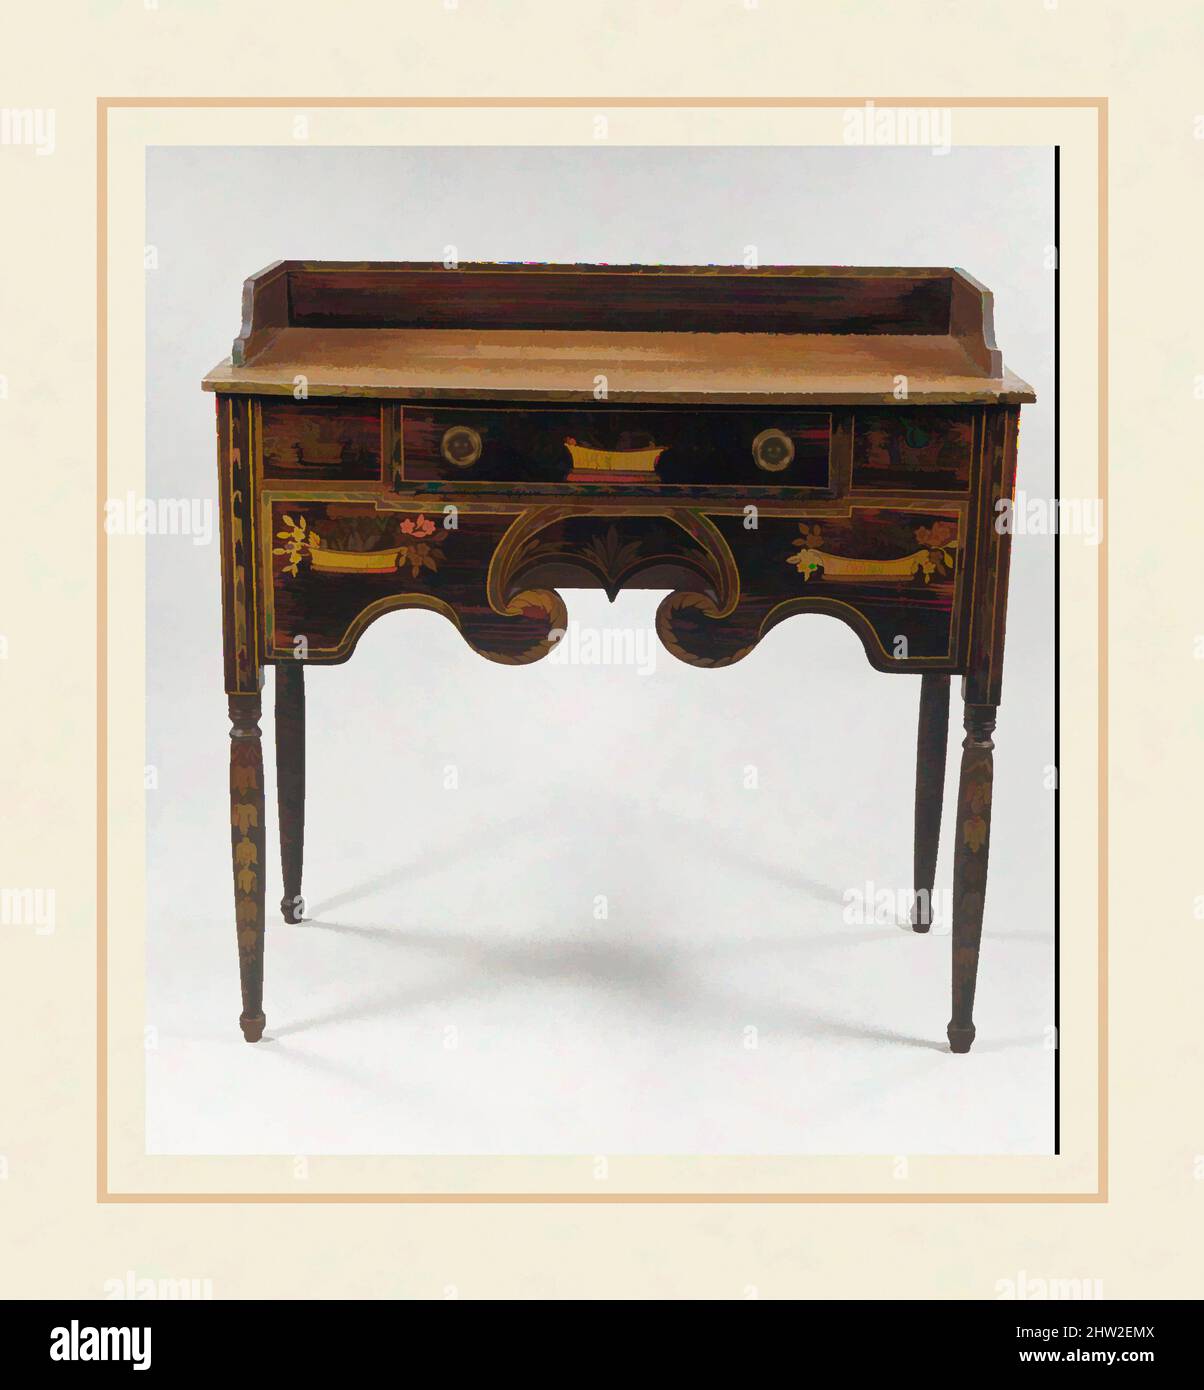 Art inspired by Serving Table, ca. 1830, Possibly made in New York, United States, American, Poplar and walnut, painted, grained and gilded, 40 5/8 x 42 x 21 in. (103.2 x 106.7 x 53.3 cm), Furniture, Classic works modernized by Artotop with a splash of modernity. Shapes, color and value, eye-catching visual impact on art. Emotions through freedom of artworks in a contemporary way. A timeless message pursuing a wildly creative new direction. Artists turning to the digital medium and creating the Artotop NFT Stock Photo